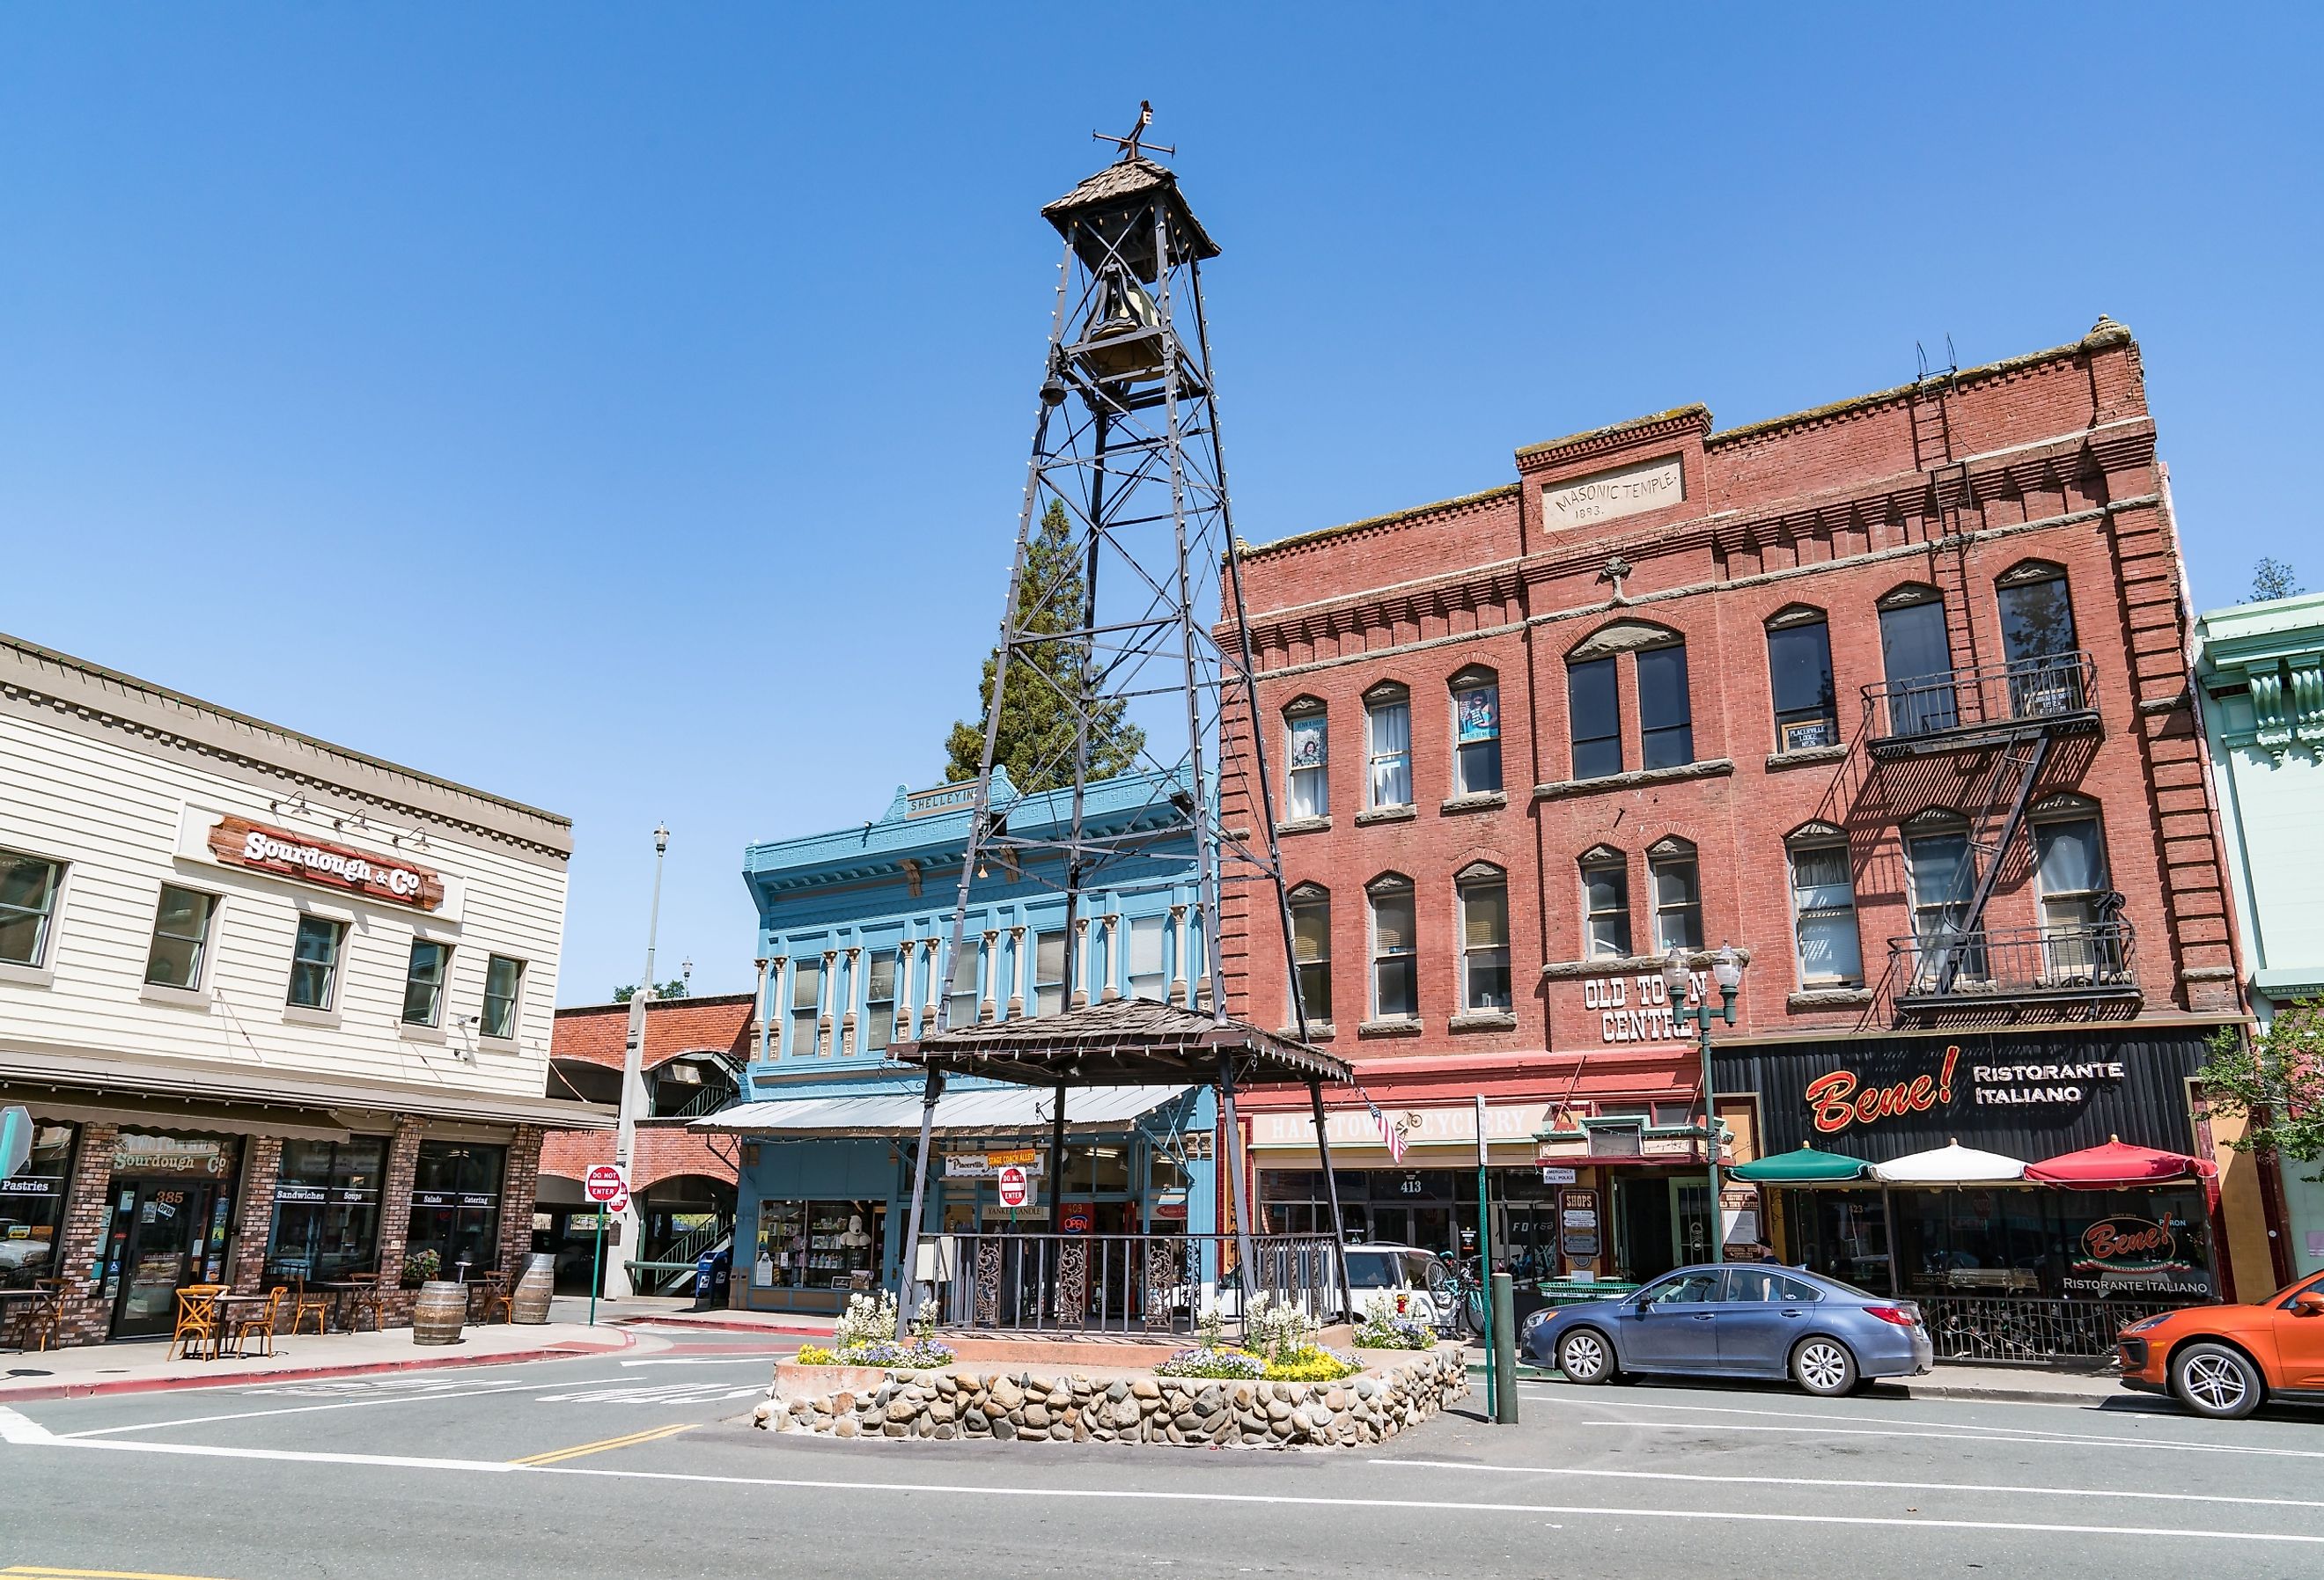 Historic town of Placerville, California. Image credit Paul Brady Photography via Shutterstock